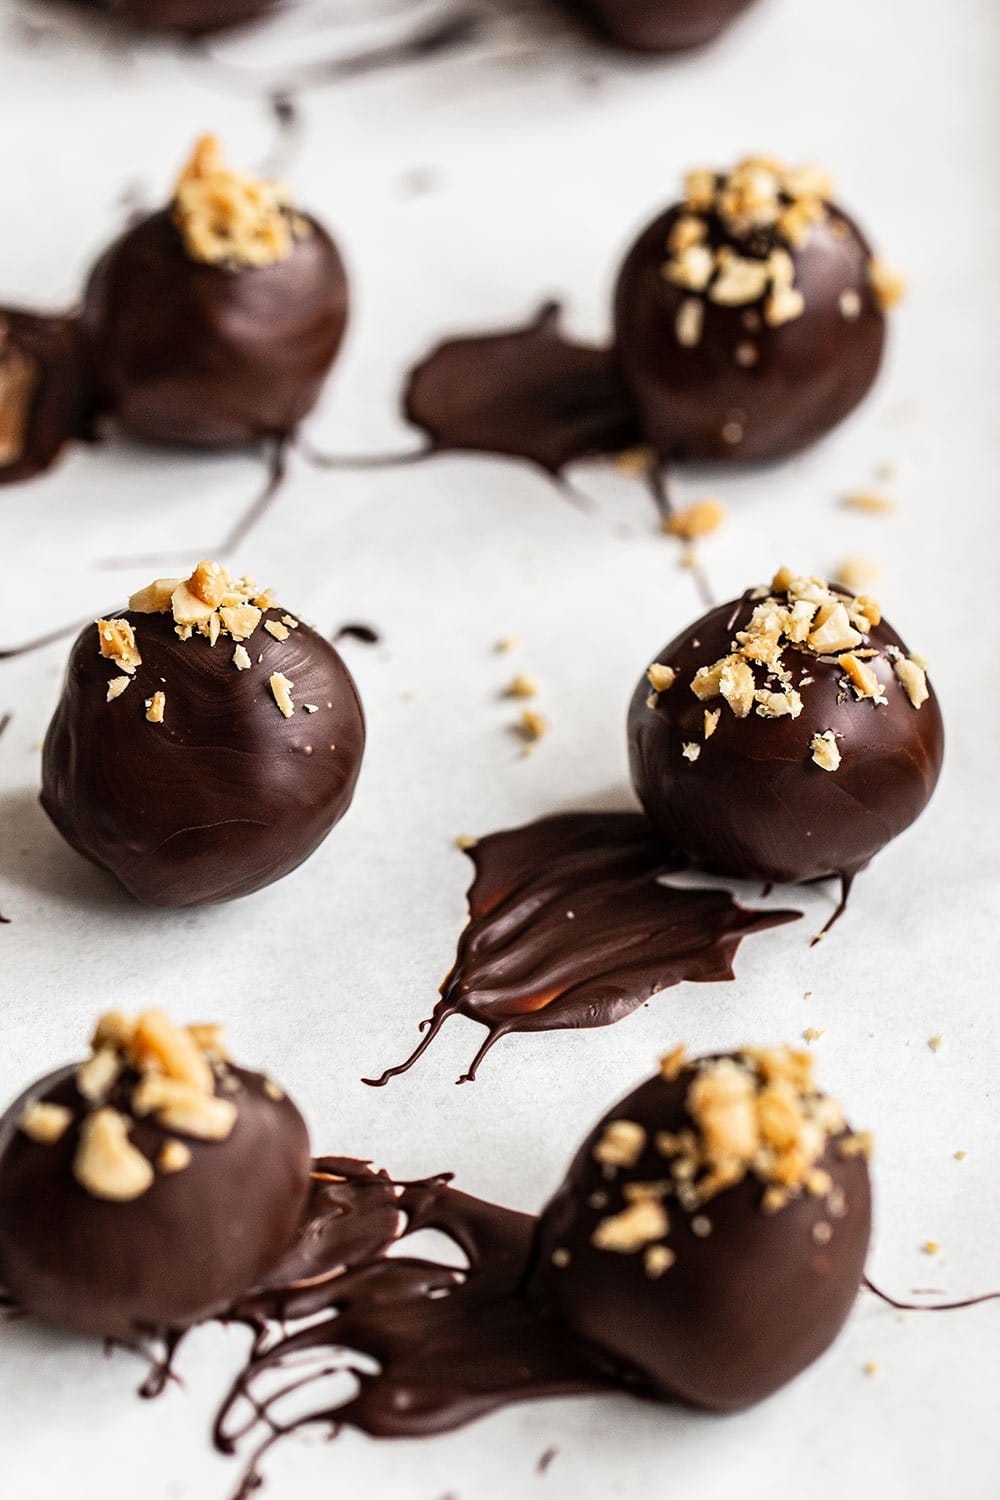 easy homemade chocolate peanut butter whiskey truffles with peanuts sprinkled on top. Such a fun truffle for your St. Patrick's Day dessert needs. 